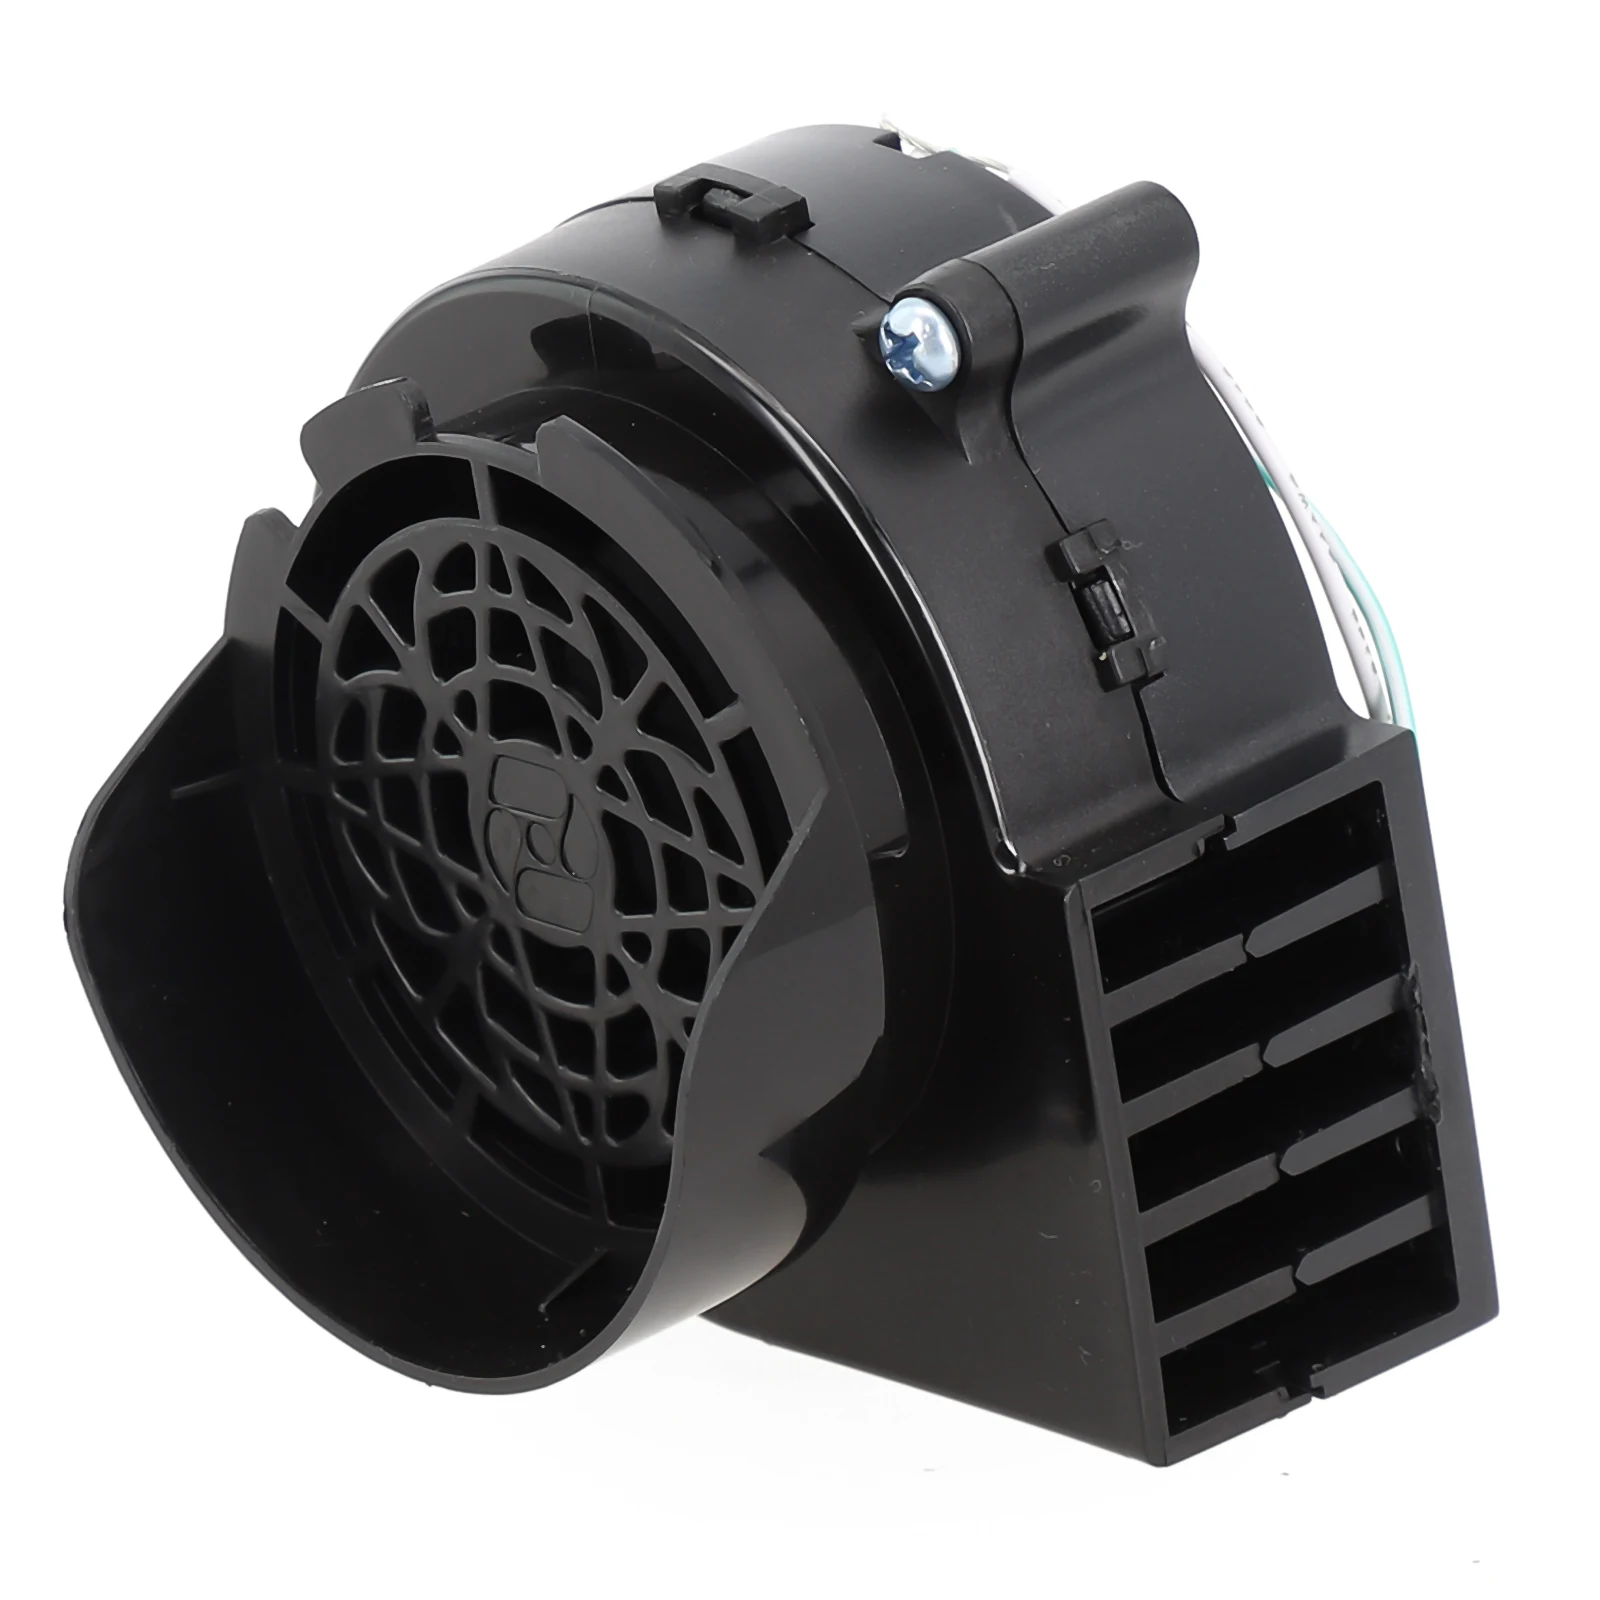 

Keep Your Yard Decor Fully Inflated Replacement Air Blower for Outdoor Holidays Silent Performance Sturdy Construction